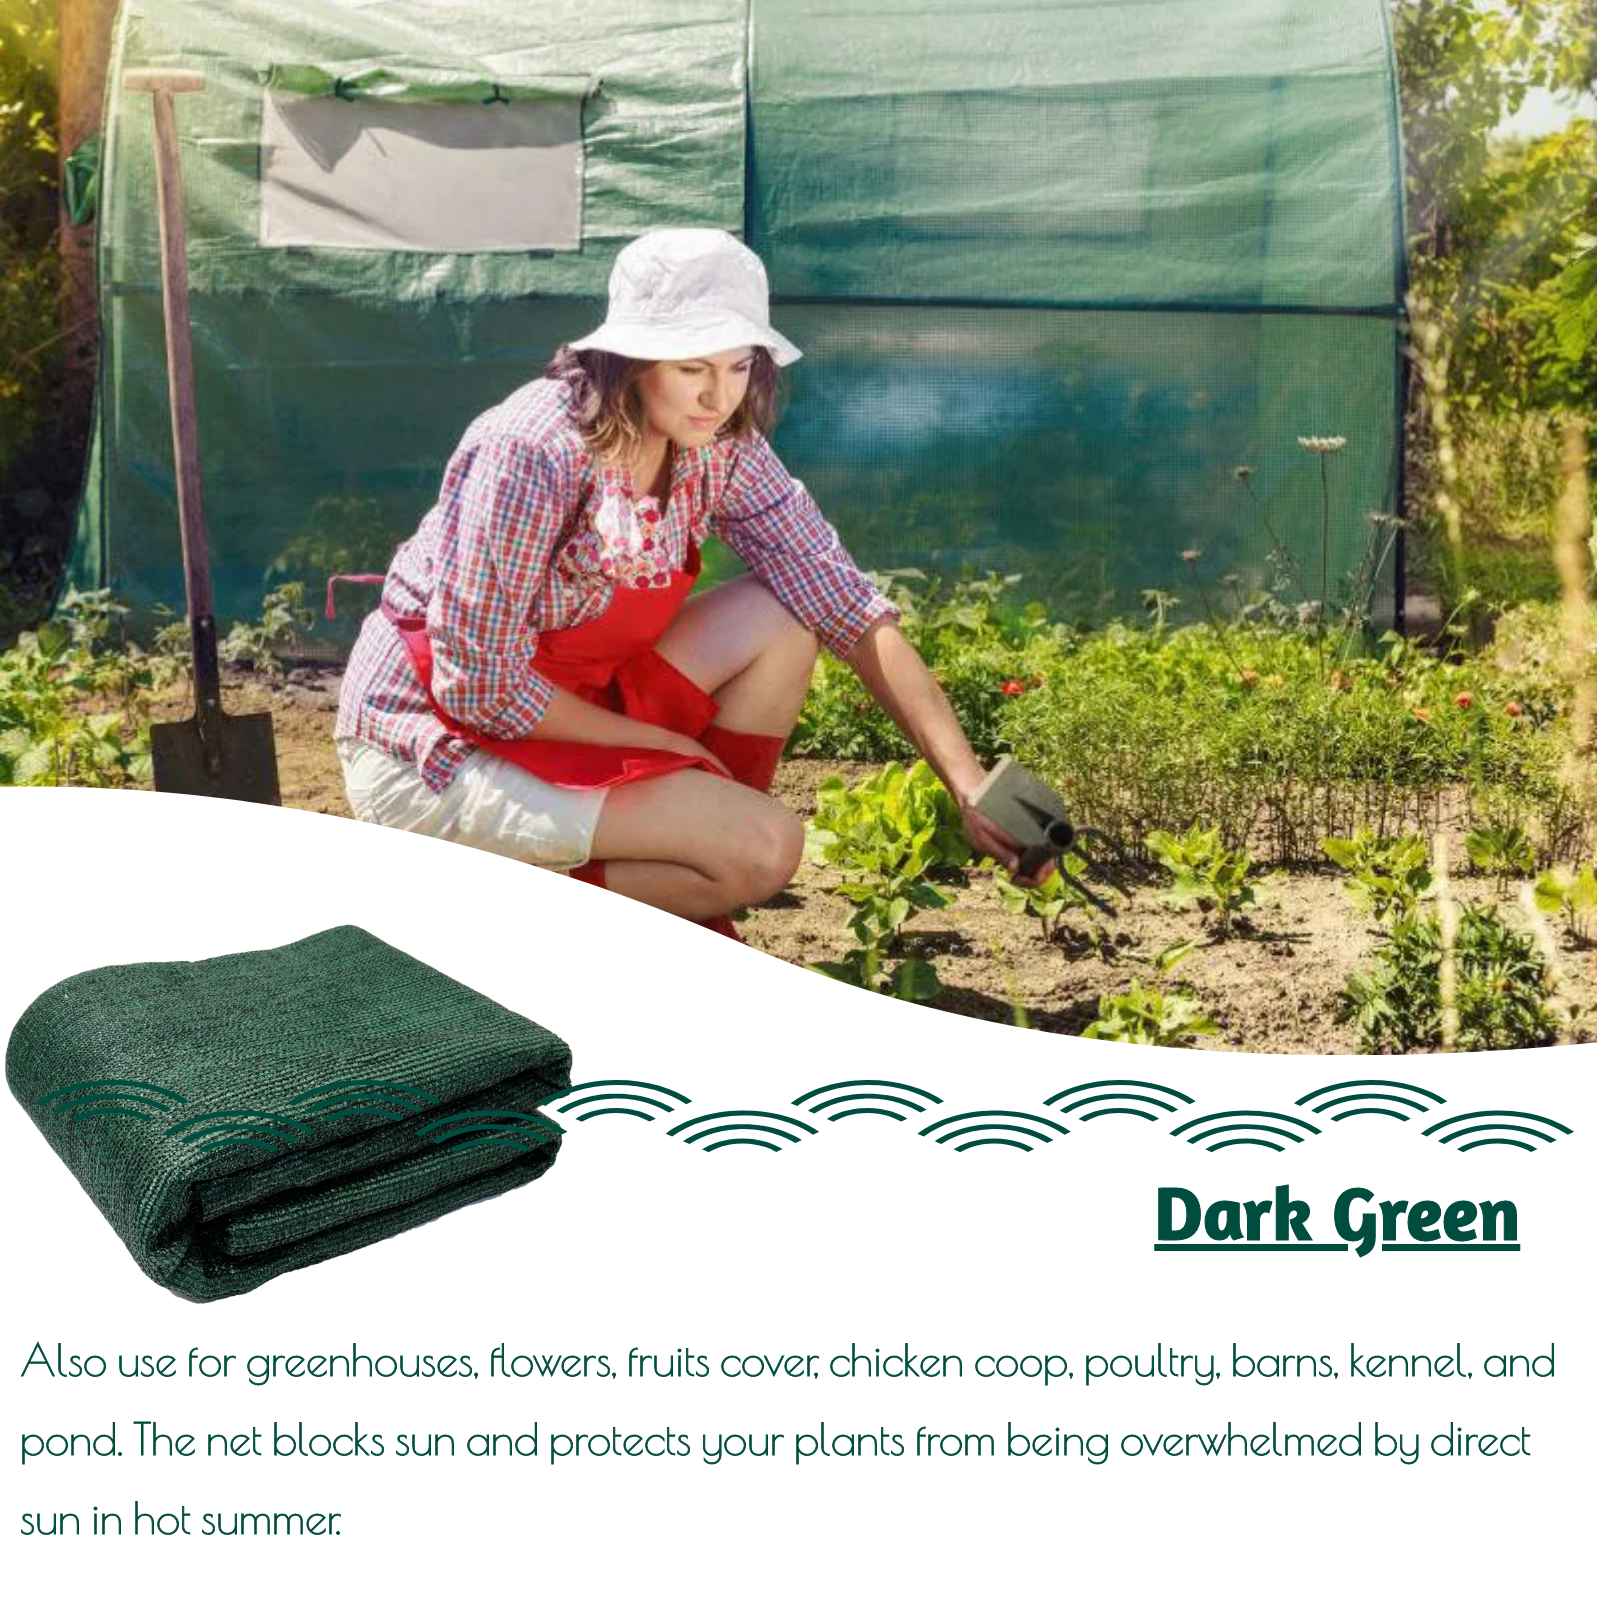 UCINNOVATE 6.5 x 10 ft High-density Green Sunblock Shade Cloth 70% Shade Fabric Taped with Grommets